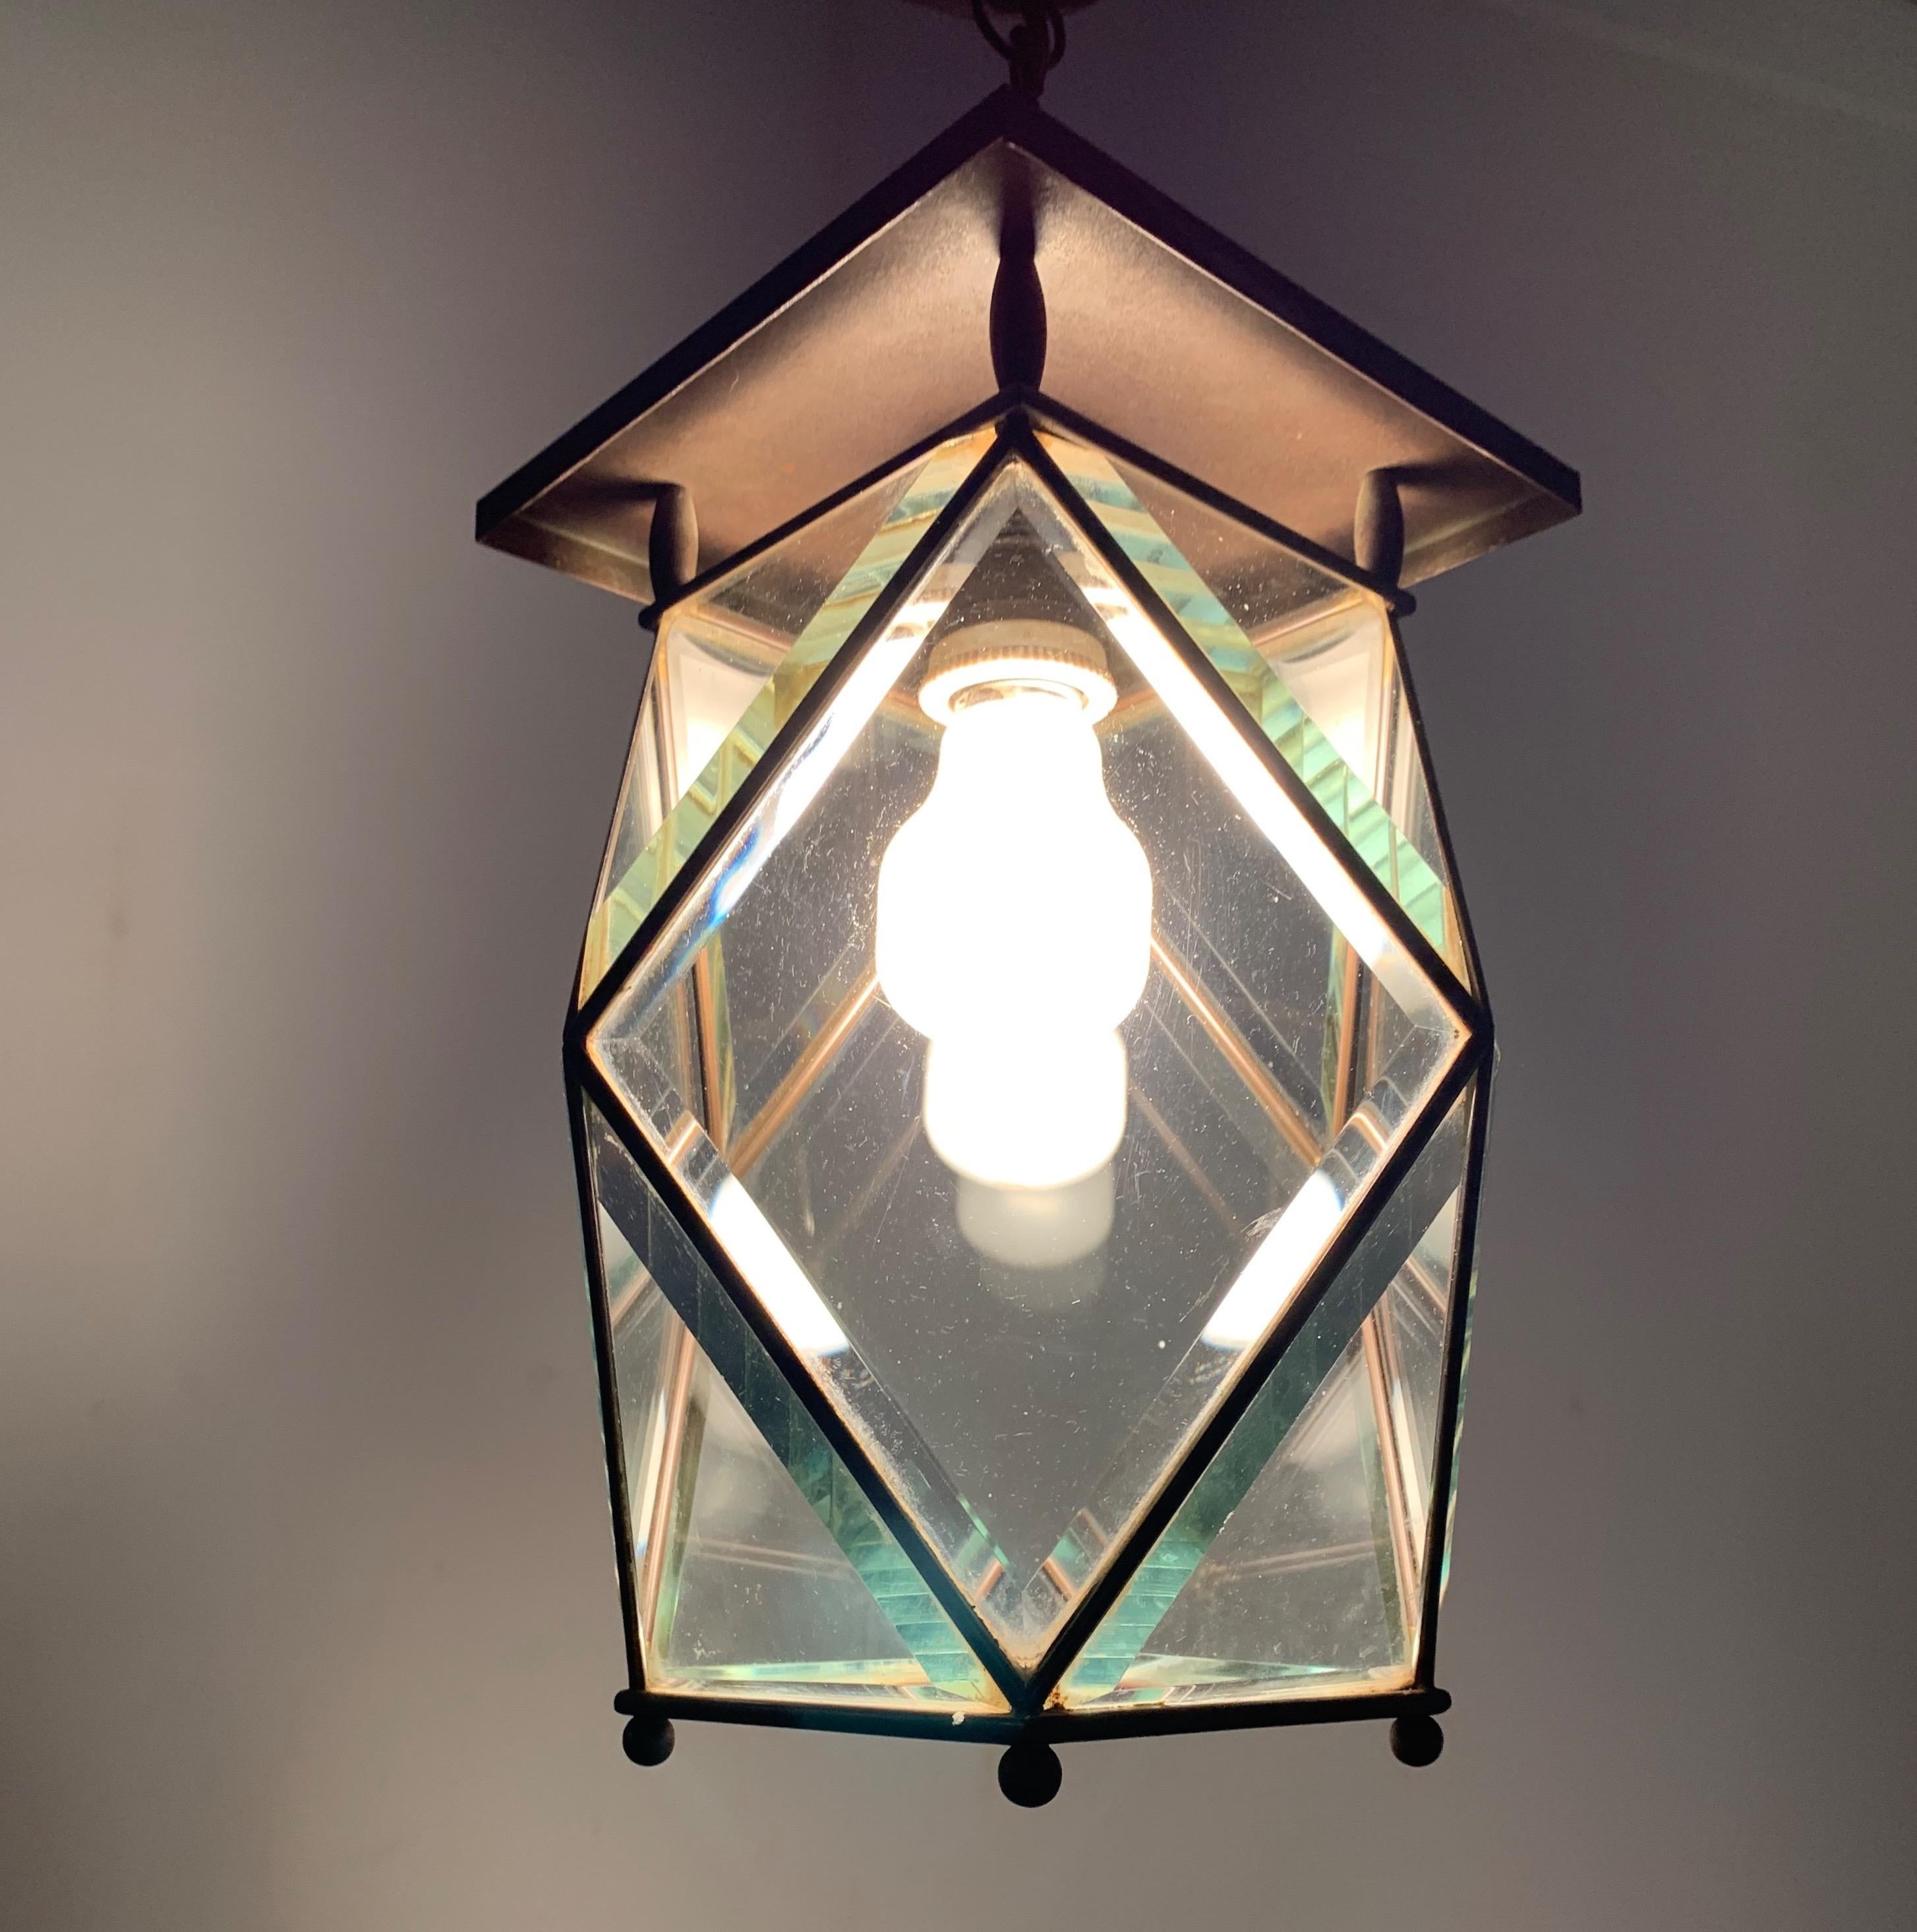 Stylish Arts & Crafts Brass and Beveled Glass Pendant Light in Adolf Loos Style 8